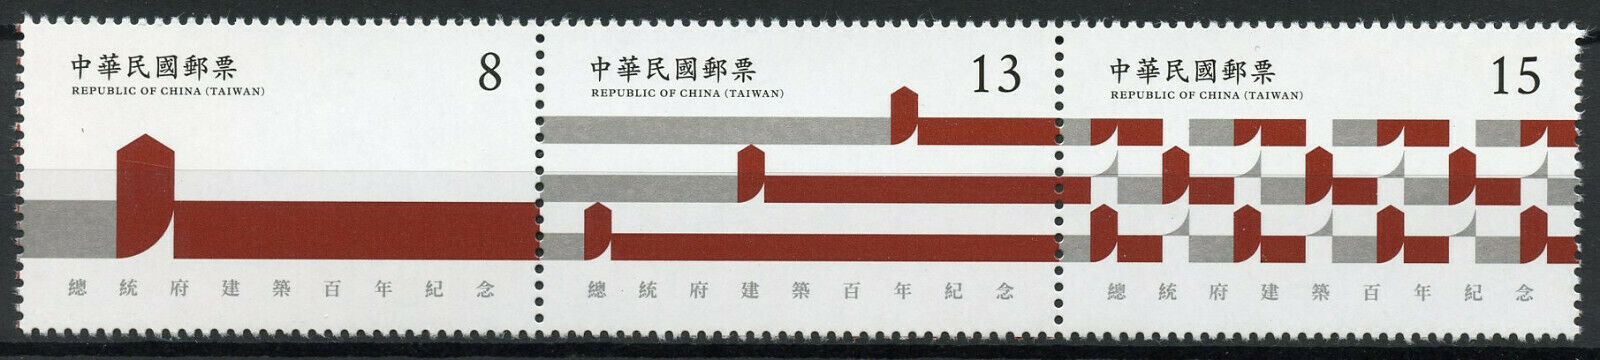 Taiwan China Architecture Stamps 2019 MNH Presidential Office Building 3v Strip